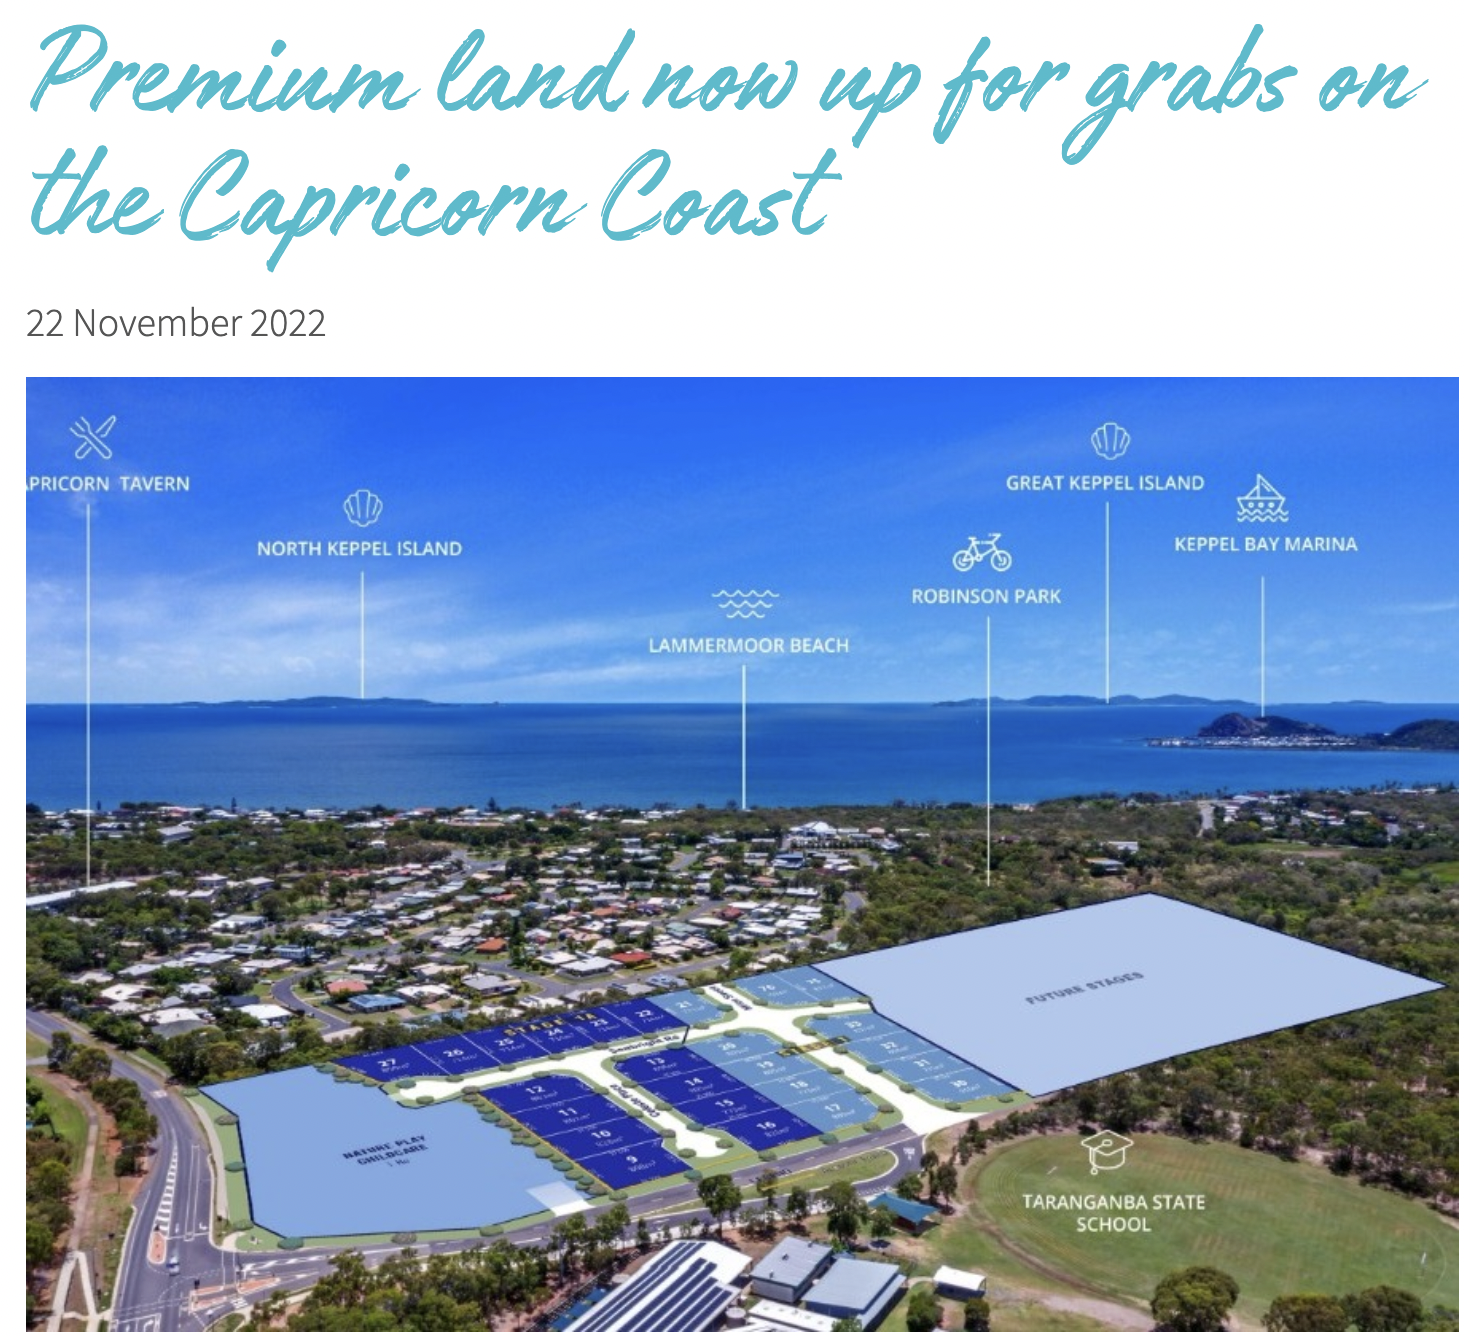 Premium land now up for grabs on the Capricorn Coast